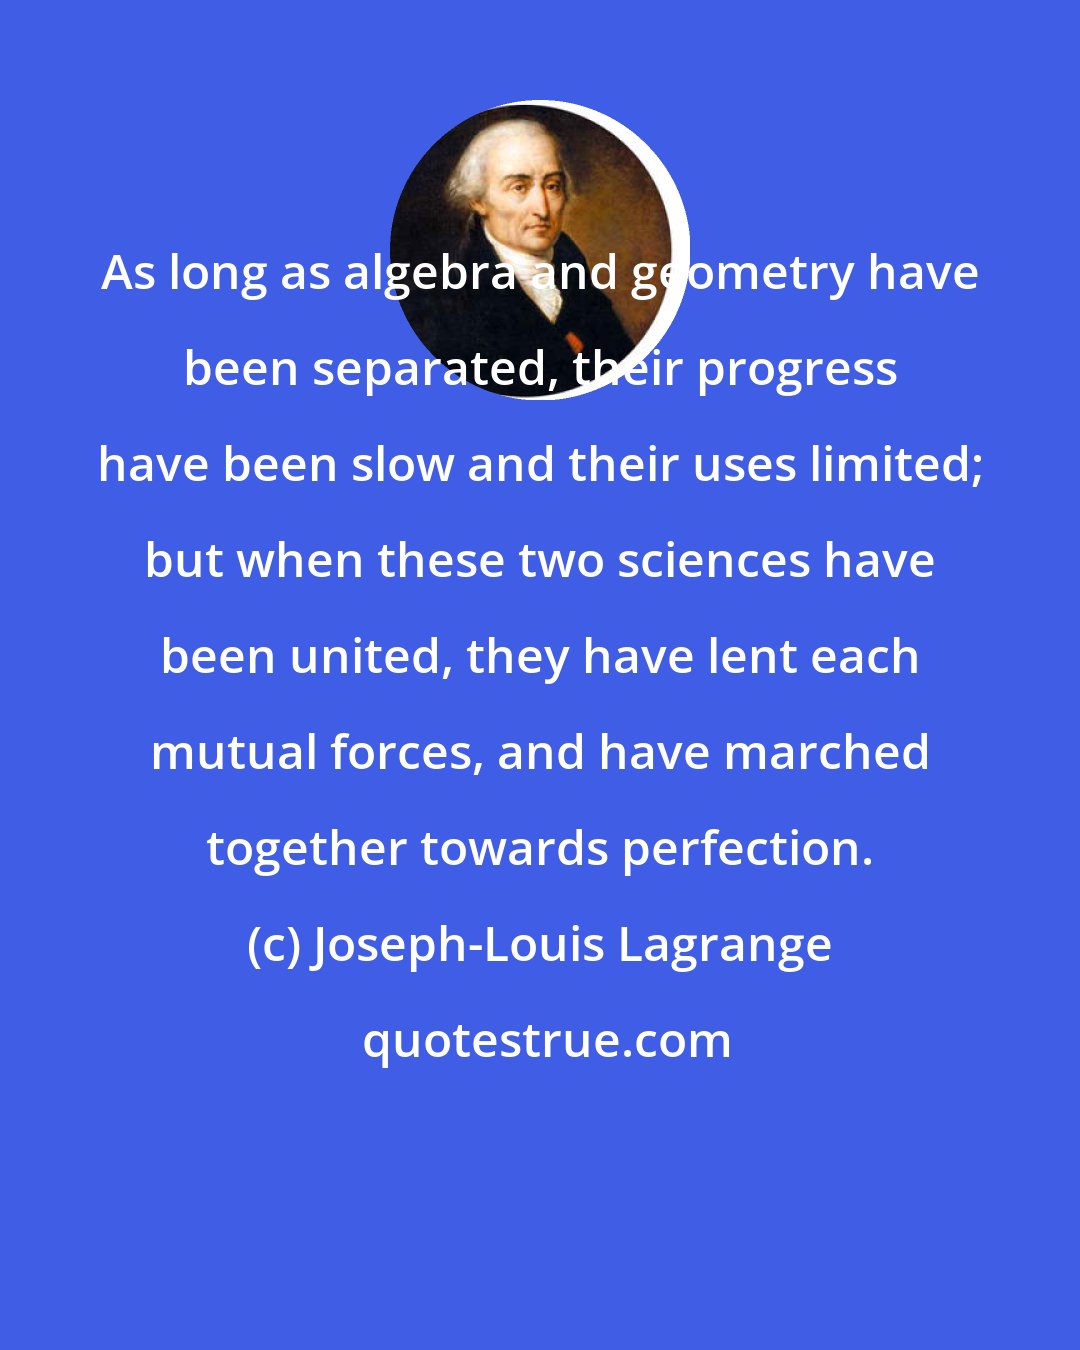 Joseph-Louis Lagrange: As long as algebra and geometry have been separated, their progress have been slow and their uses limited; but when these two sciences have been united, they have lent each mutual forces, and have marched together towards perfection.